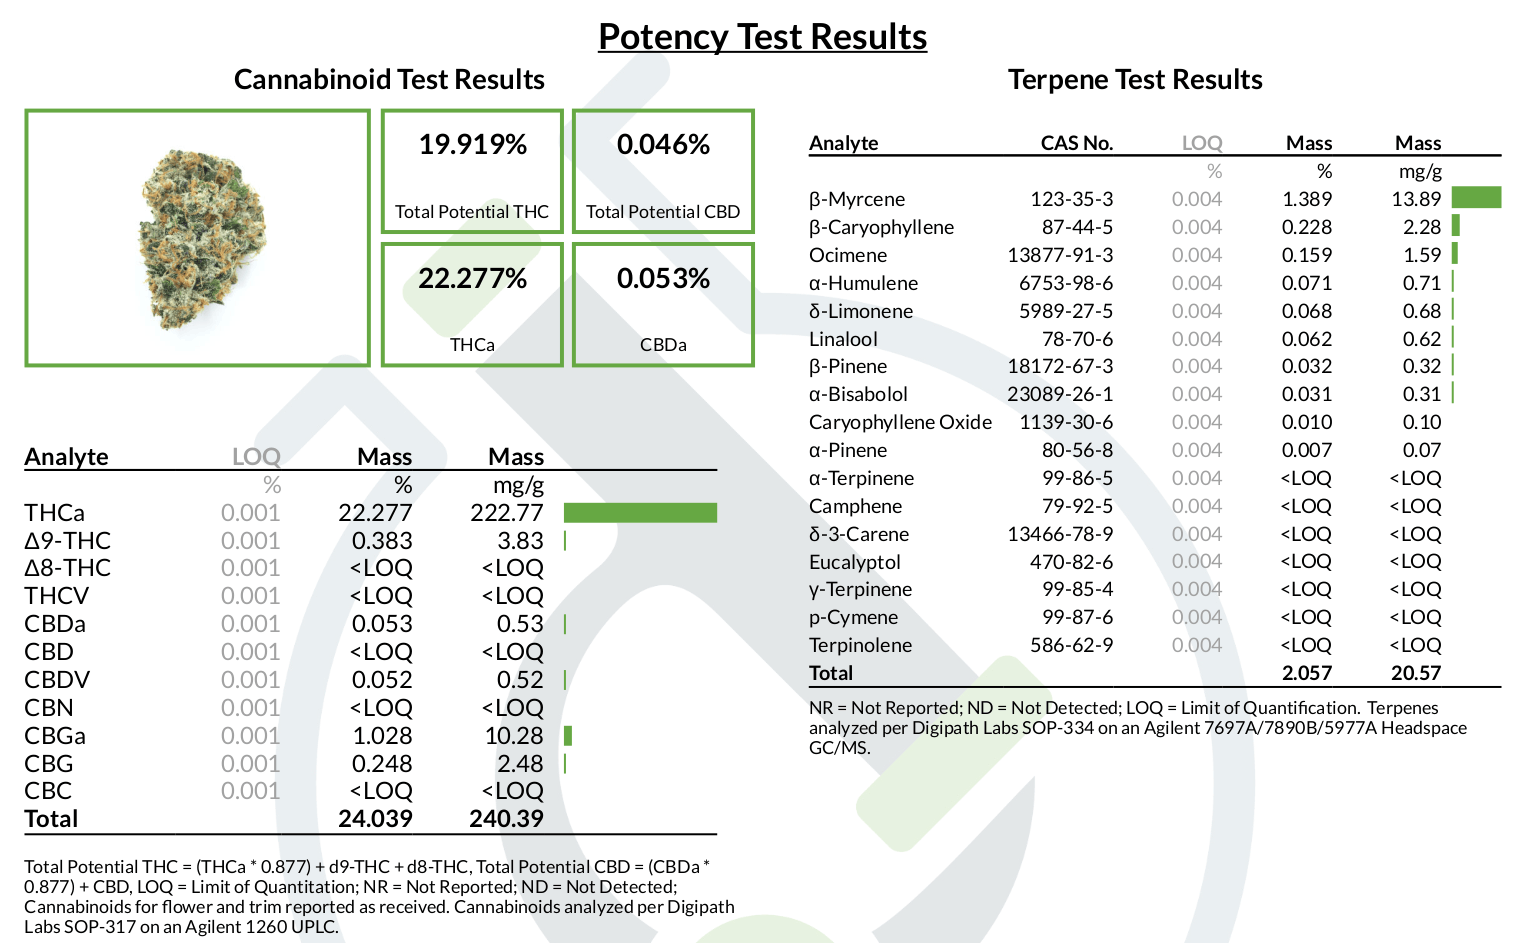 Potency test results listed in graph.